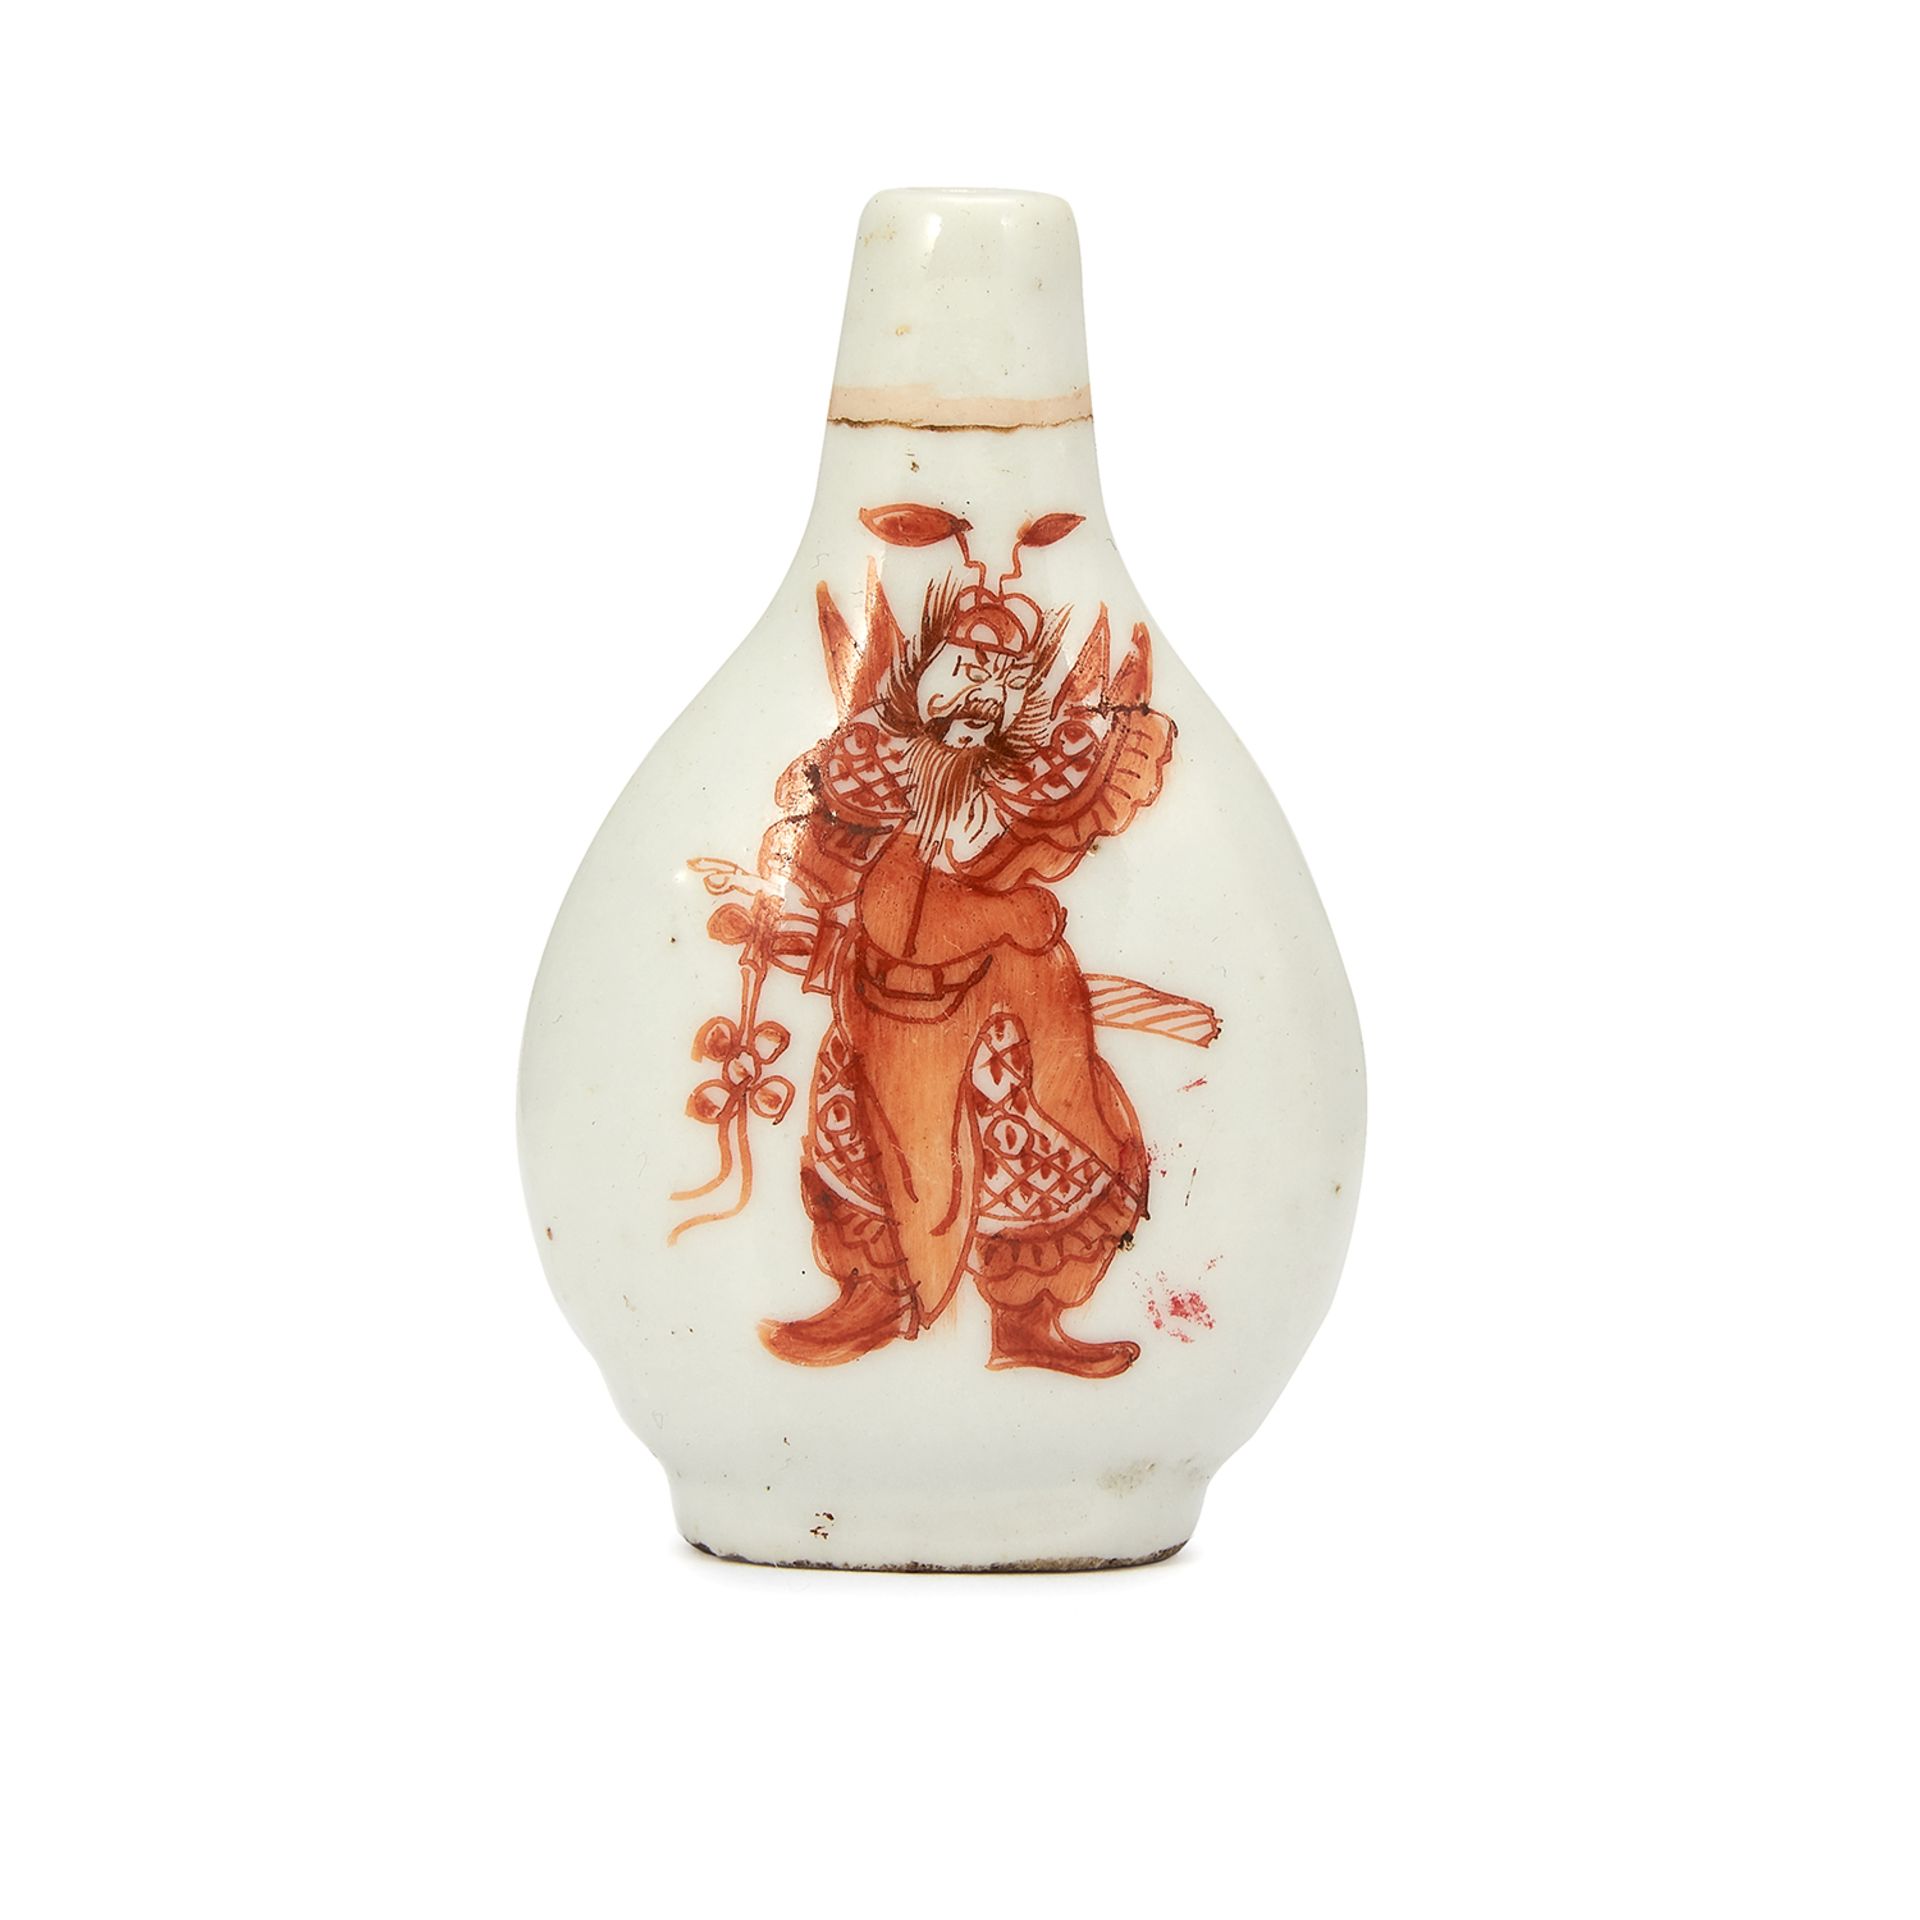 AN ANTIQUE CHINESE PORCELAIN SNUFF BOTTLE, QING DYNASTY flattened tapering form with painted